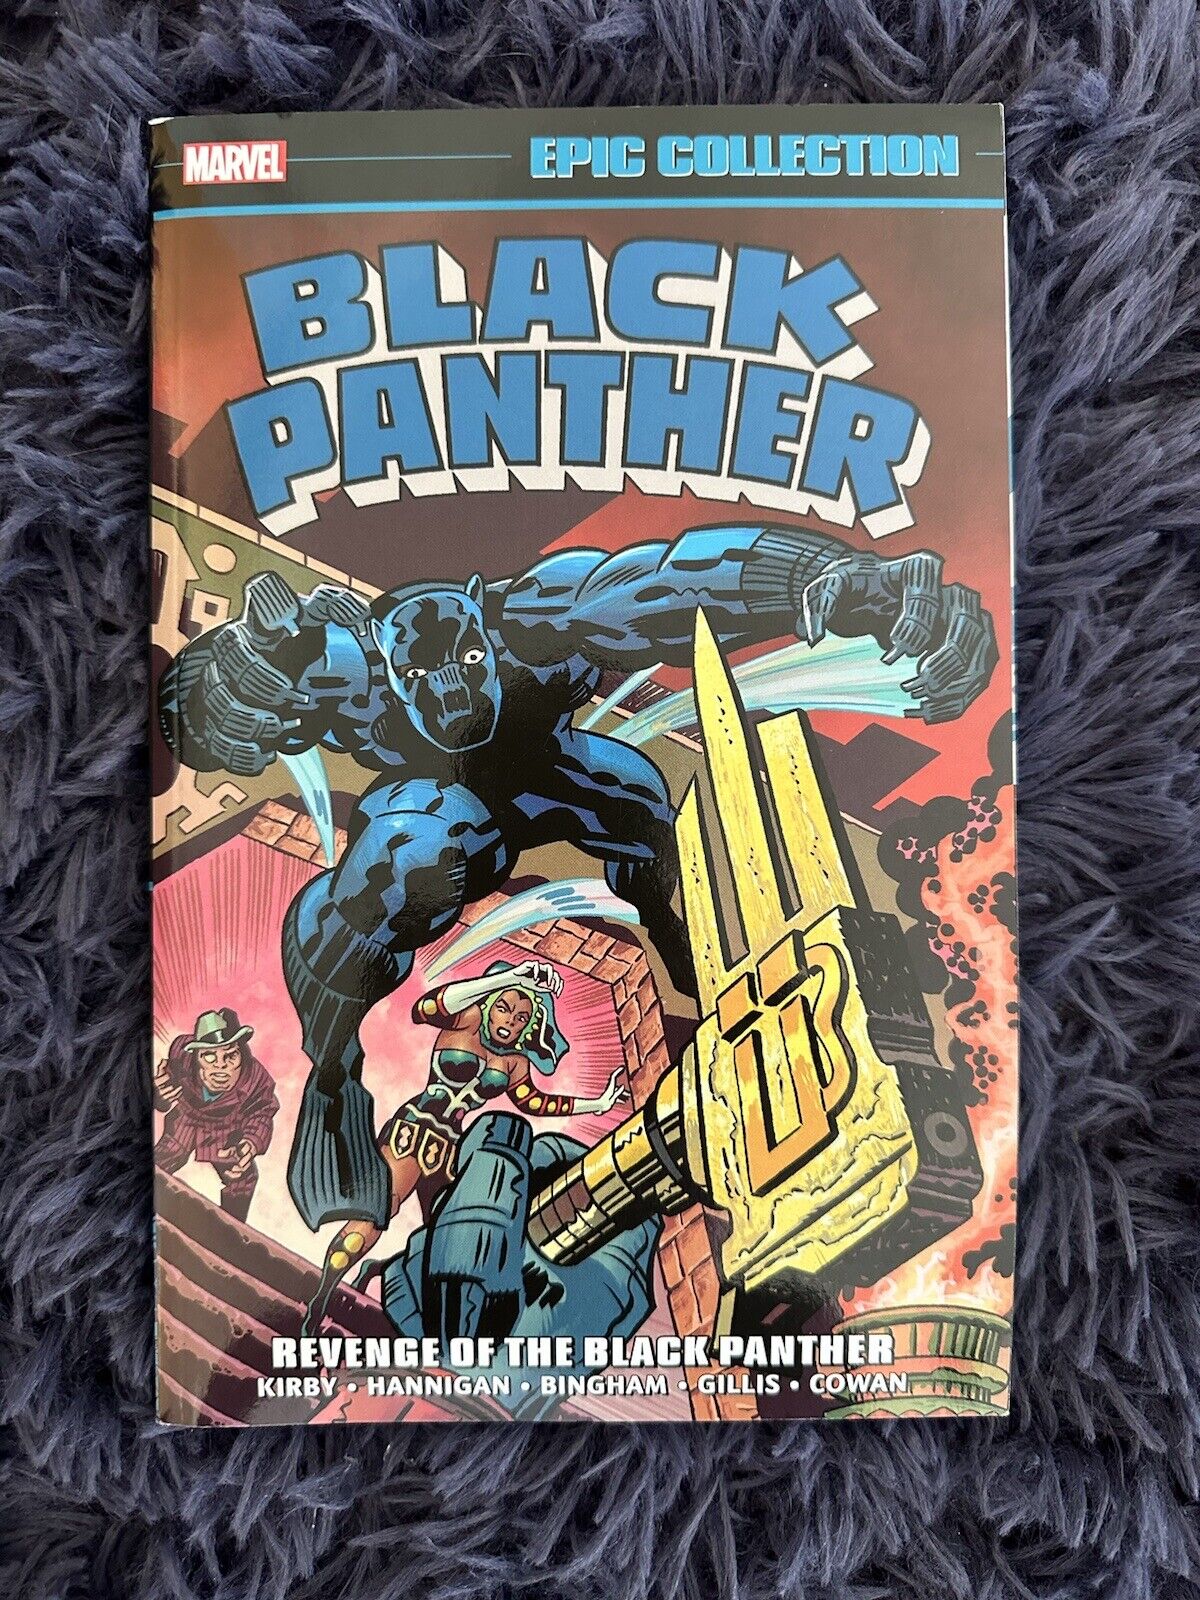 Black Panther Epic Collection Vol. 2 Revenge Of The Black Panther Jack Kirby